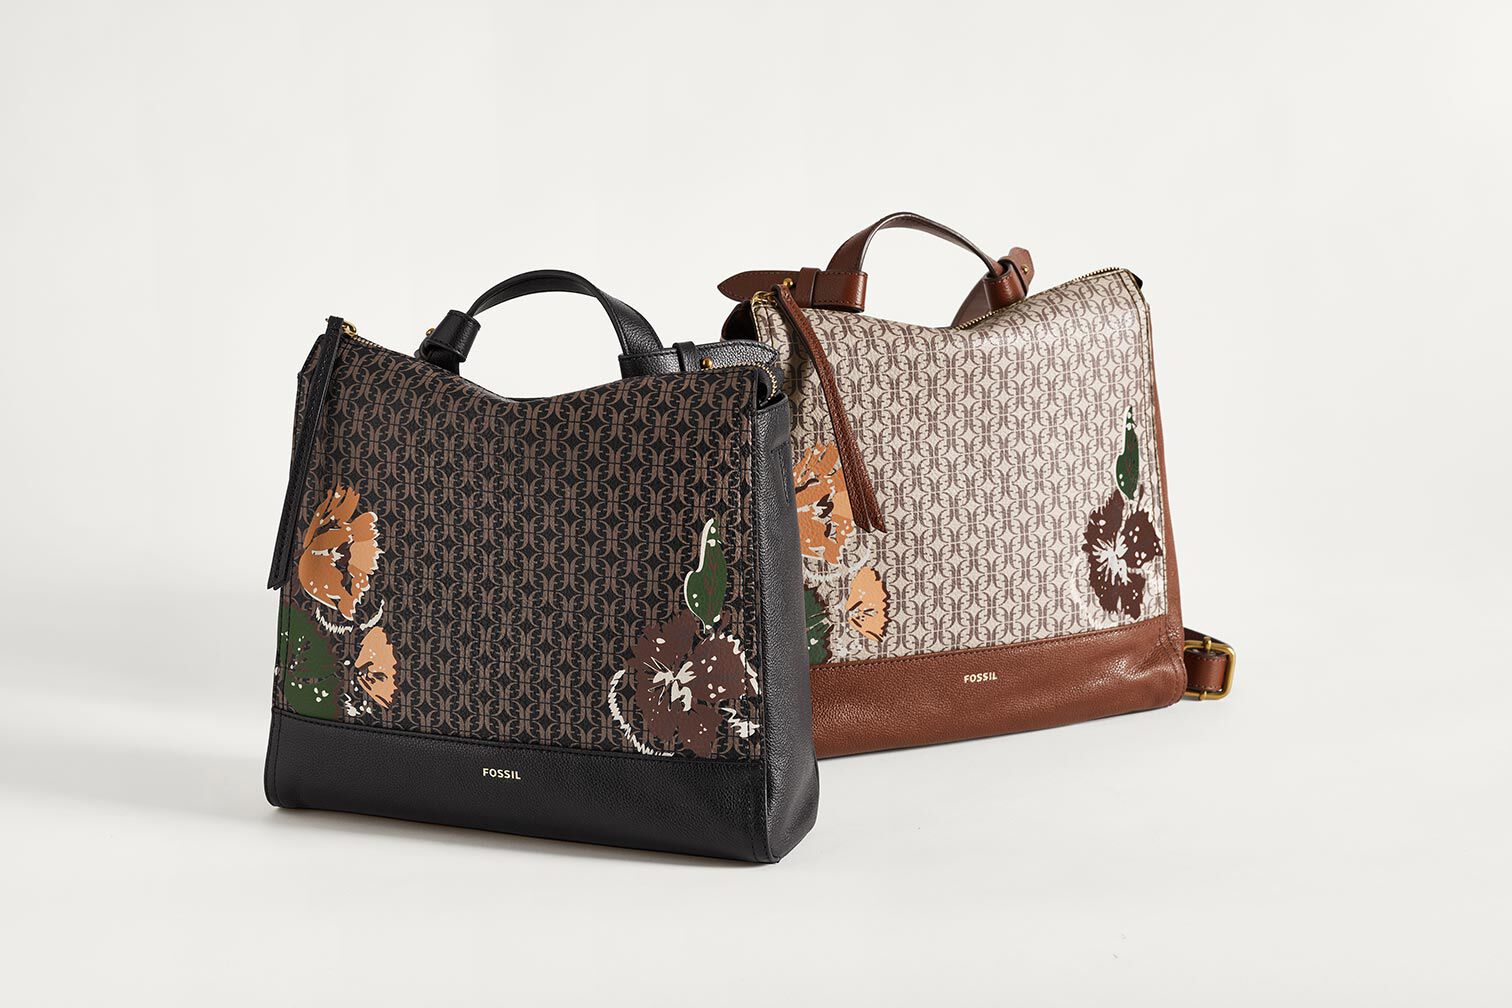 Two leather women's handbags with floral patterns.